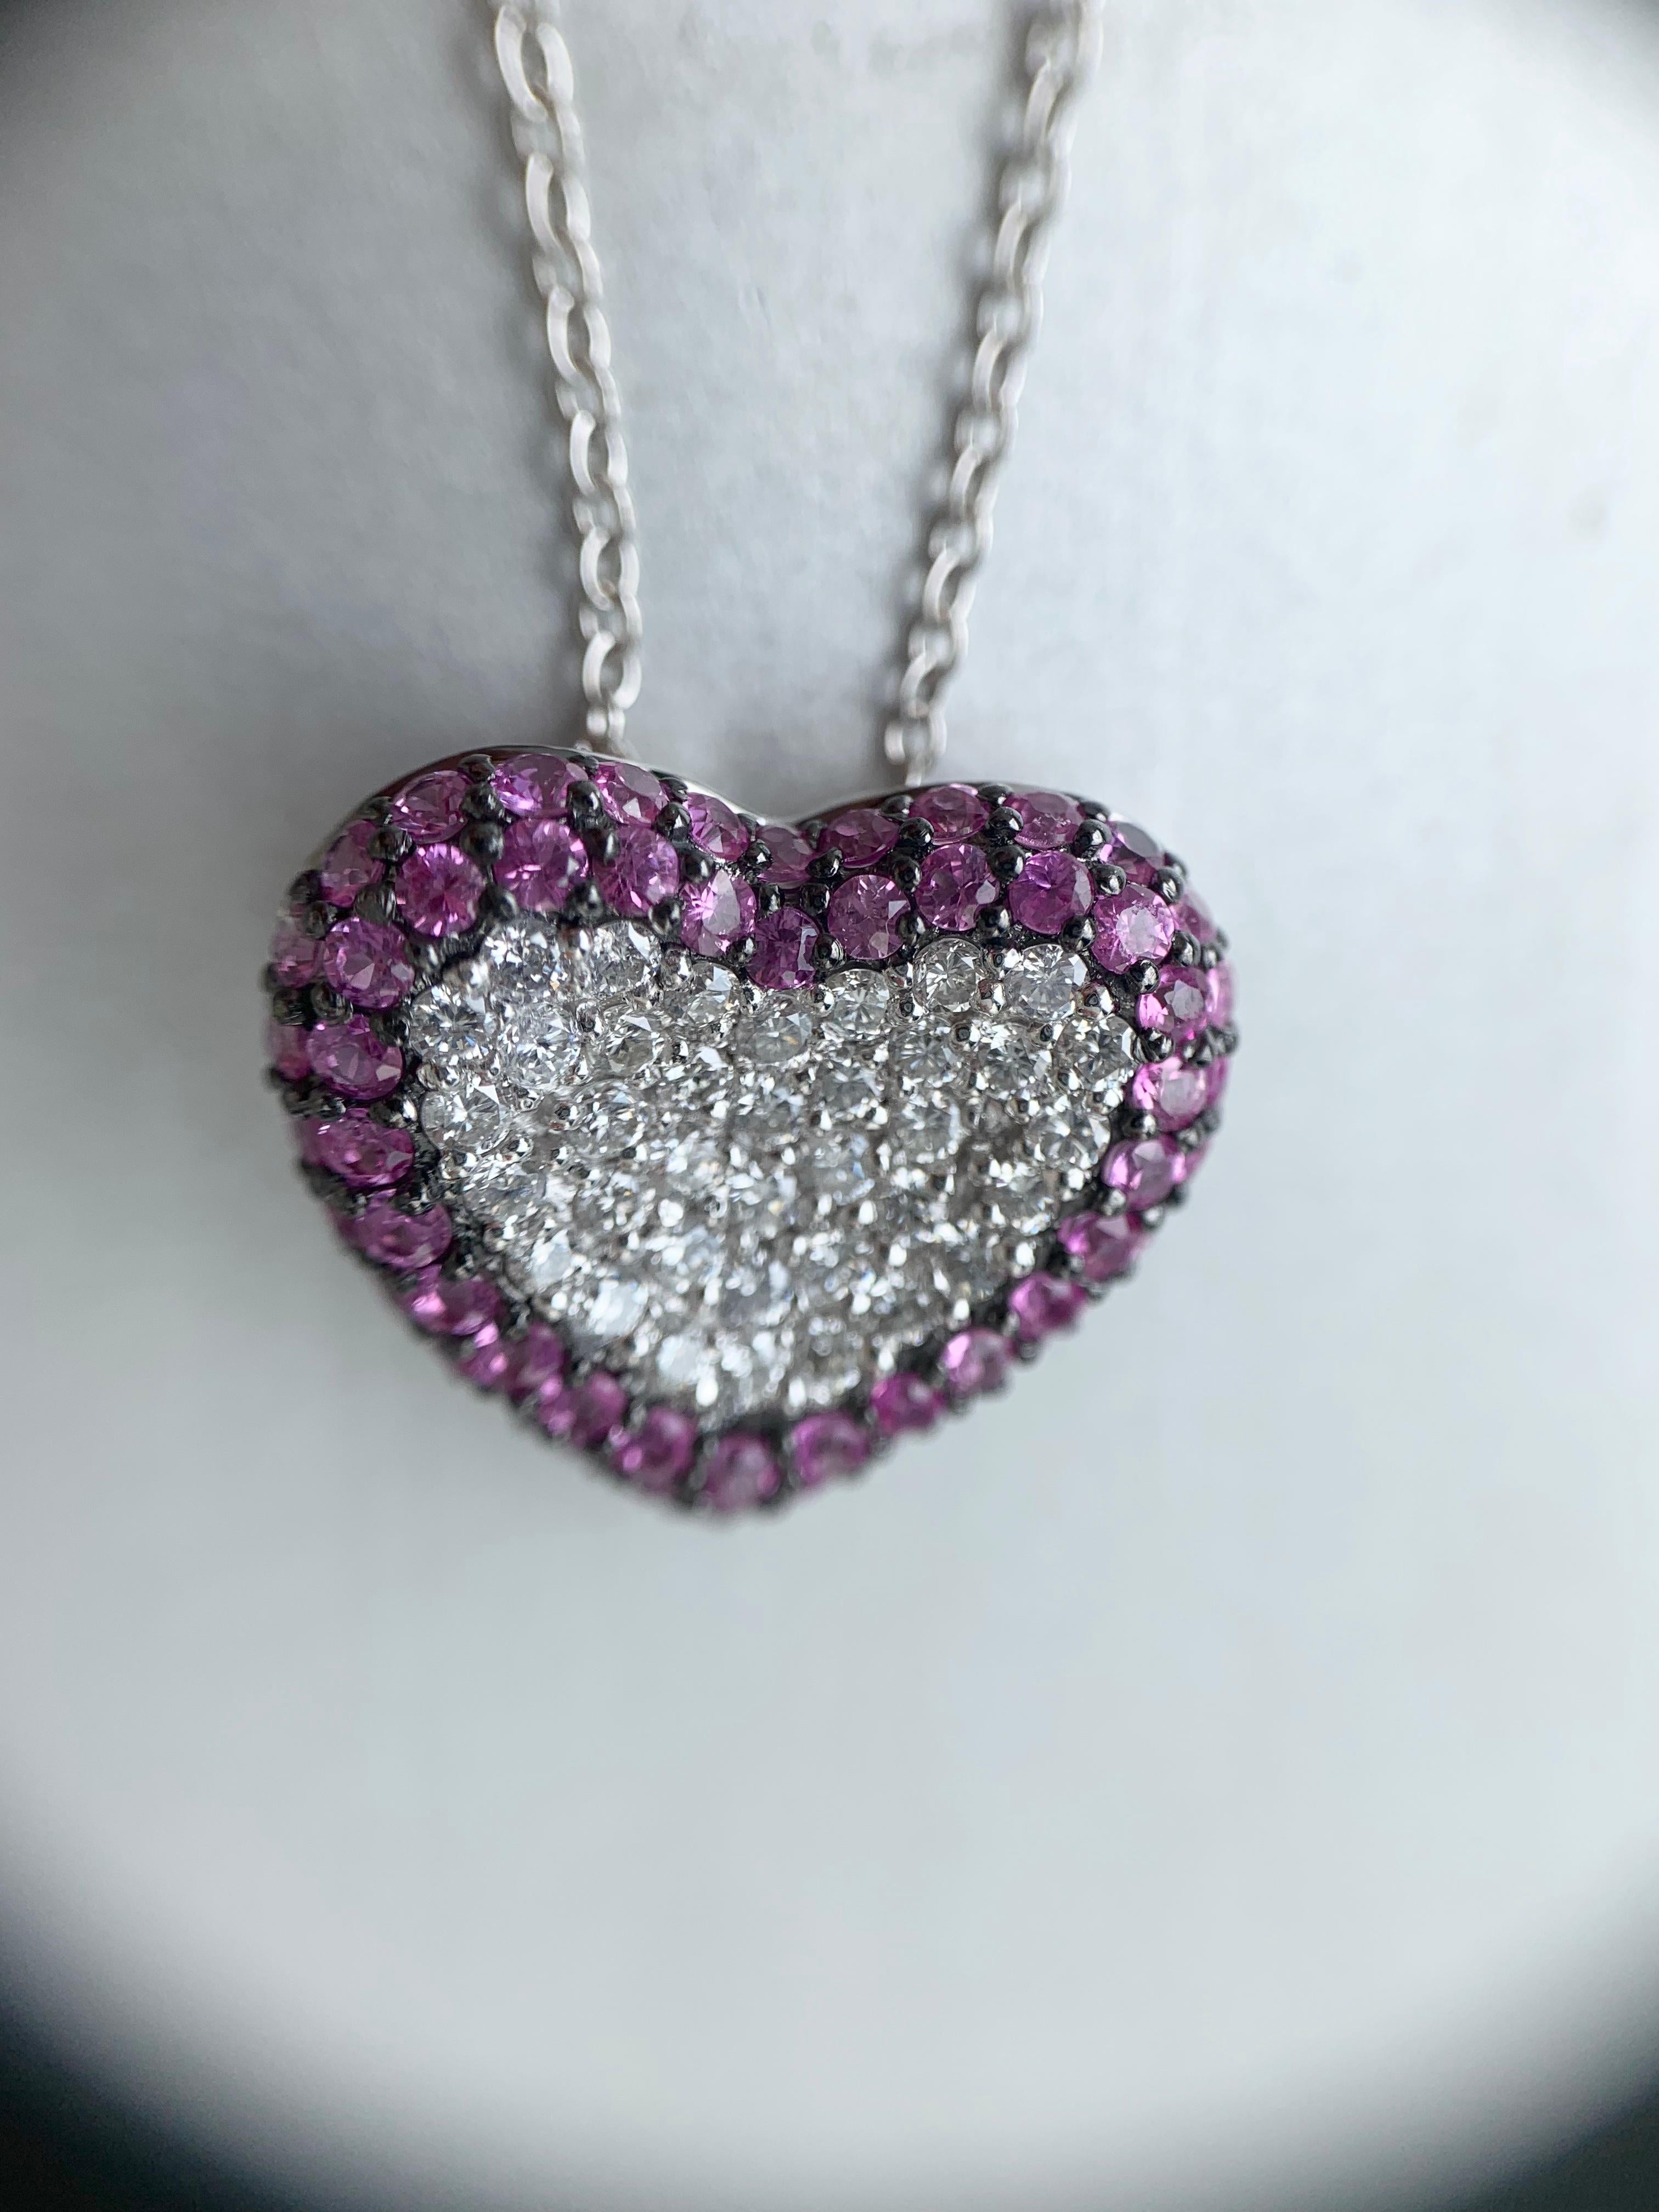 Contemporary White Gold Diamond and Pink Sapphire Heart Pendant Necklace